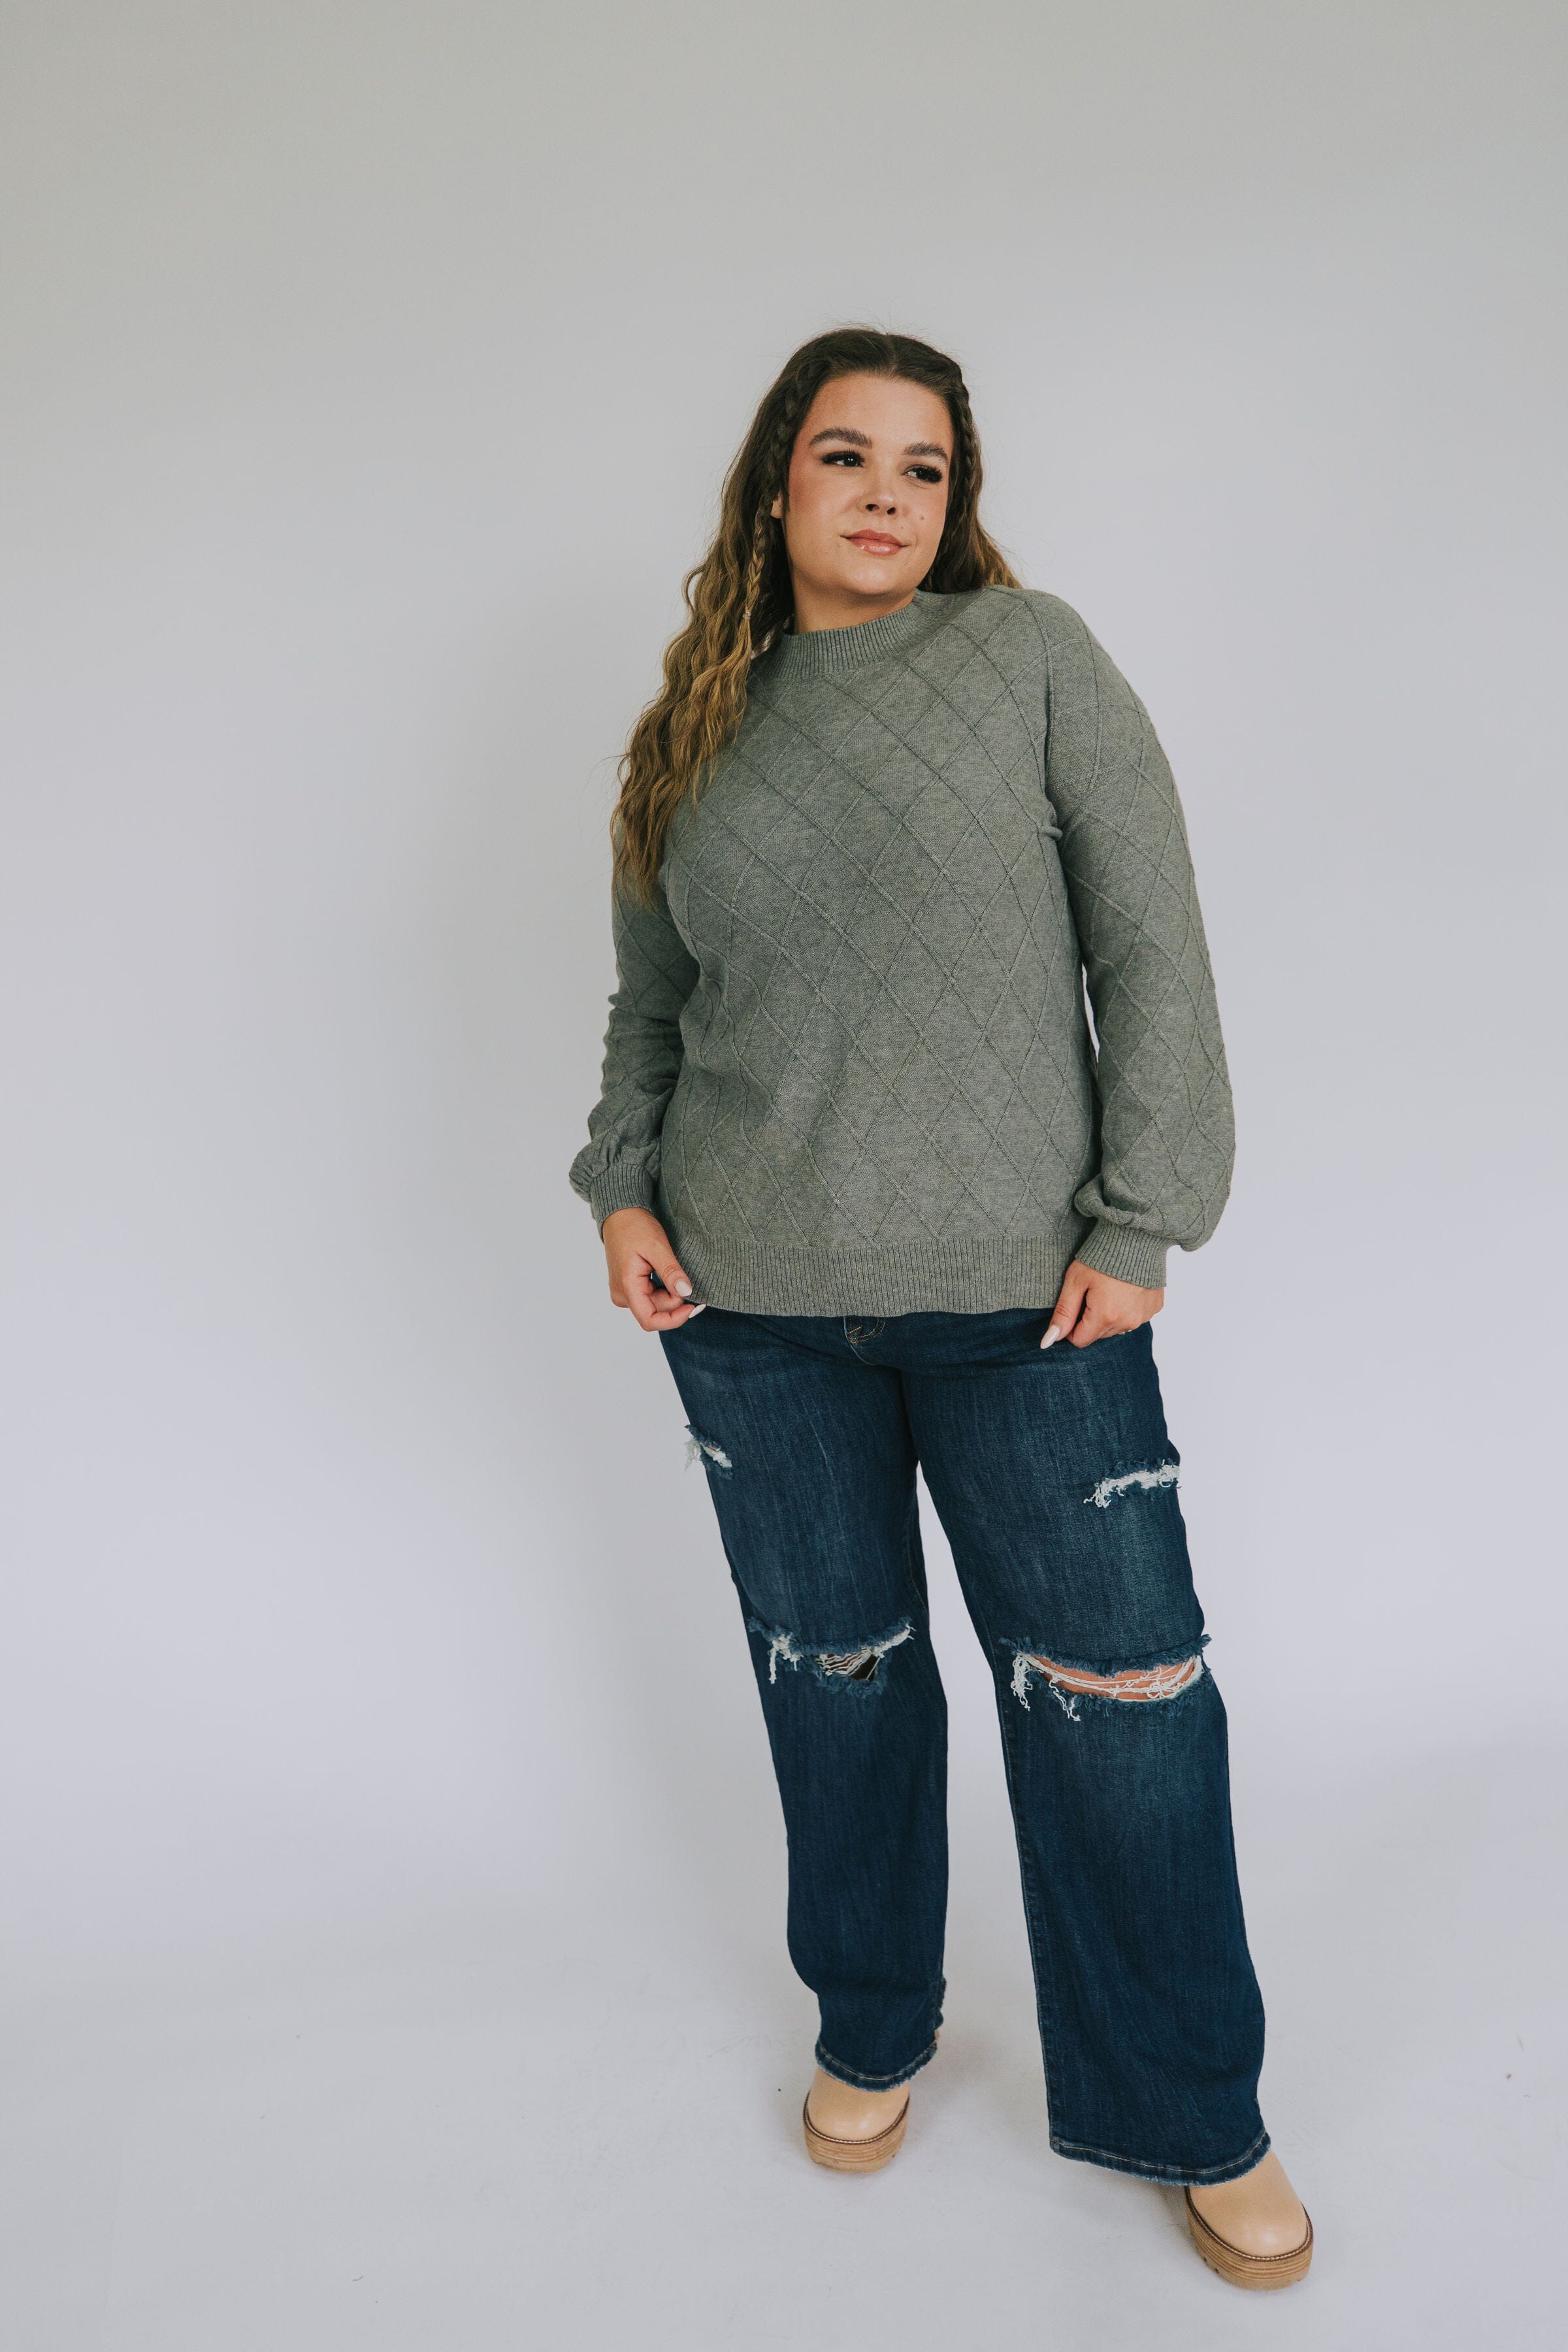 PLUS SIZE - Almost Home Sweater - 2 Colors!